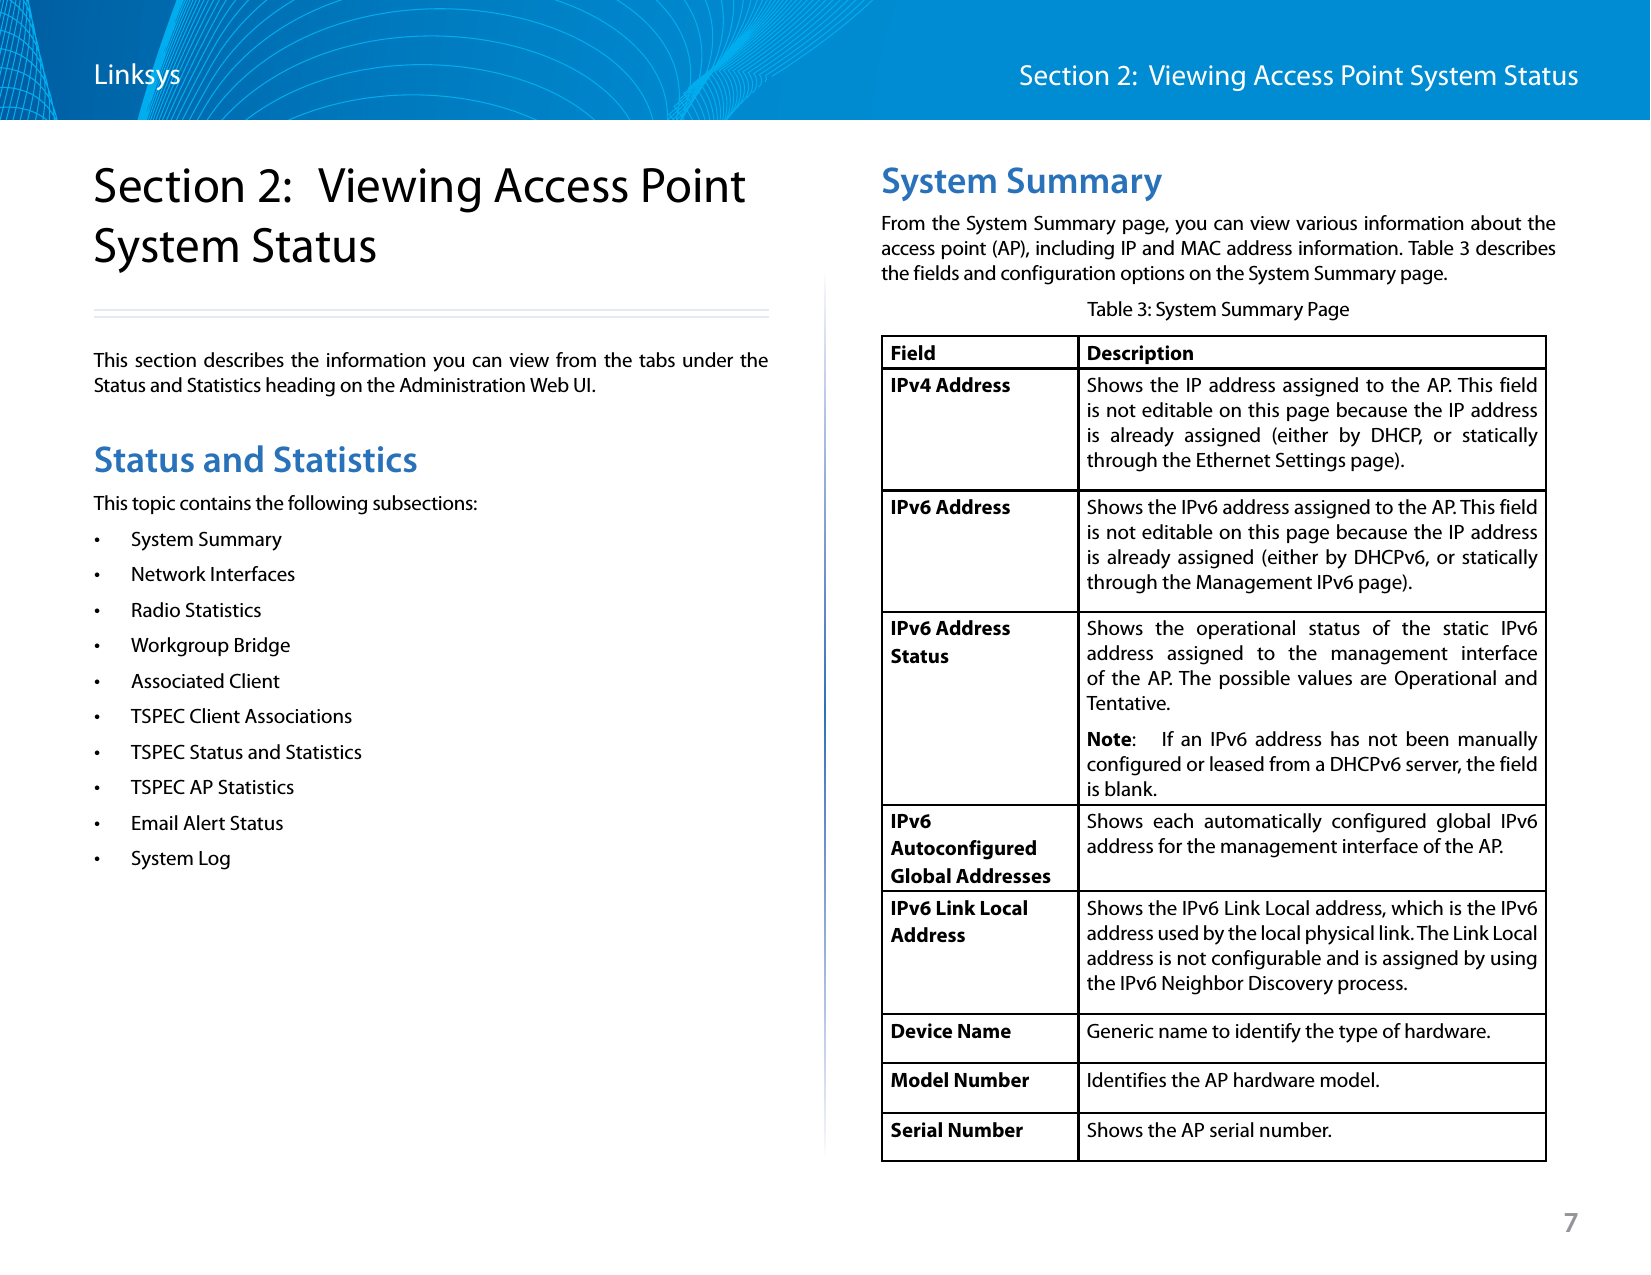 Section 2:  Viewing Access Point System StatusLinksys7Section 2:  Viewing Access Point System StatusThis section describes the information you can view from the tabs under the Status and Statistics heading on the Administration Web UI.Status and StatisticsThis topic contains the following subsections: •System Summary •Network Interfaces •Radio Statistics •Workgroup Bridge •Associated Client •TSPEC Client Associations •TSPEC Status and Statistics •TSPEC AP Statistics •Email Alert Status •System LogSystem SummaryFrom the System Summary page, you can view various information about the access point (AP), including IP and MAC address information. Table 3 describes the fields and configuration options on the System Summary page.Table 3: System Summary PageField  DescriptionIPv4 Address Shows the IP address assigned to the AP. This field is not editable on this page because the IP address is already assigned (either by DHCP, or statically through the Ethernet Settings page).IPv6 Address Shows the IPv6 address assigned to the AP. This field is not editable on this page because the IP address is already assigned (either by DHCPv6, or statically through the Management IPv6 page).IPv6 Address StatusShows the operational status of the static IPv6 address assigned to the management interface of the AP. The possible values are Operational and Tentative. Note:   If an IPv6 address has not been manually configured or leased from a DHCPv6 server, the field is blank.IPv6Autoconfigured Global AddressesShows each automatically configured global IPv6 address for the management interface of the AP.IPv6 Link Local AddressShows the IPv6 Link Local address, which is the IPv6 address used by the local physical link. The Link Local address is not configurable and is assigned by using the IPv6 Neighbor Discovery process.Device Name Generic name to identify the type of hardware.Model Number Identifies the AP hardware model.Serial Number Shows the AP serial number.